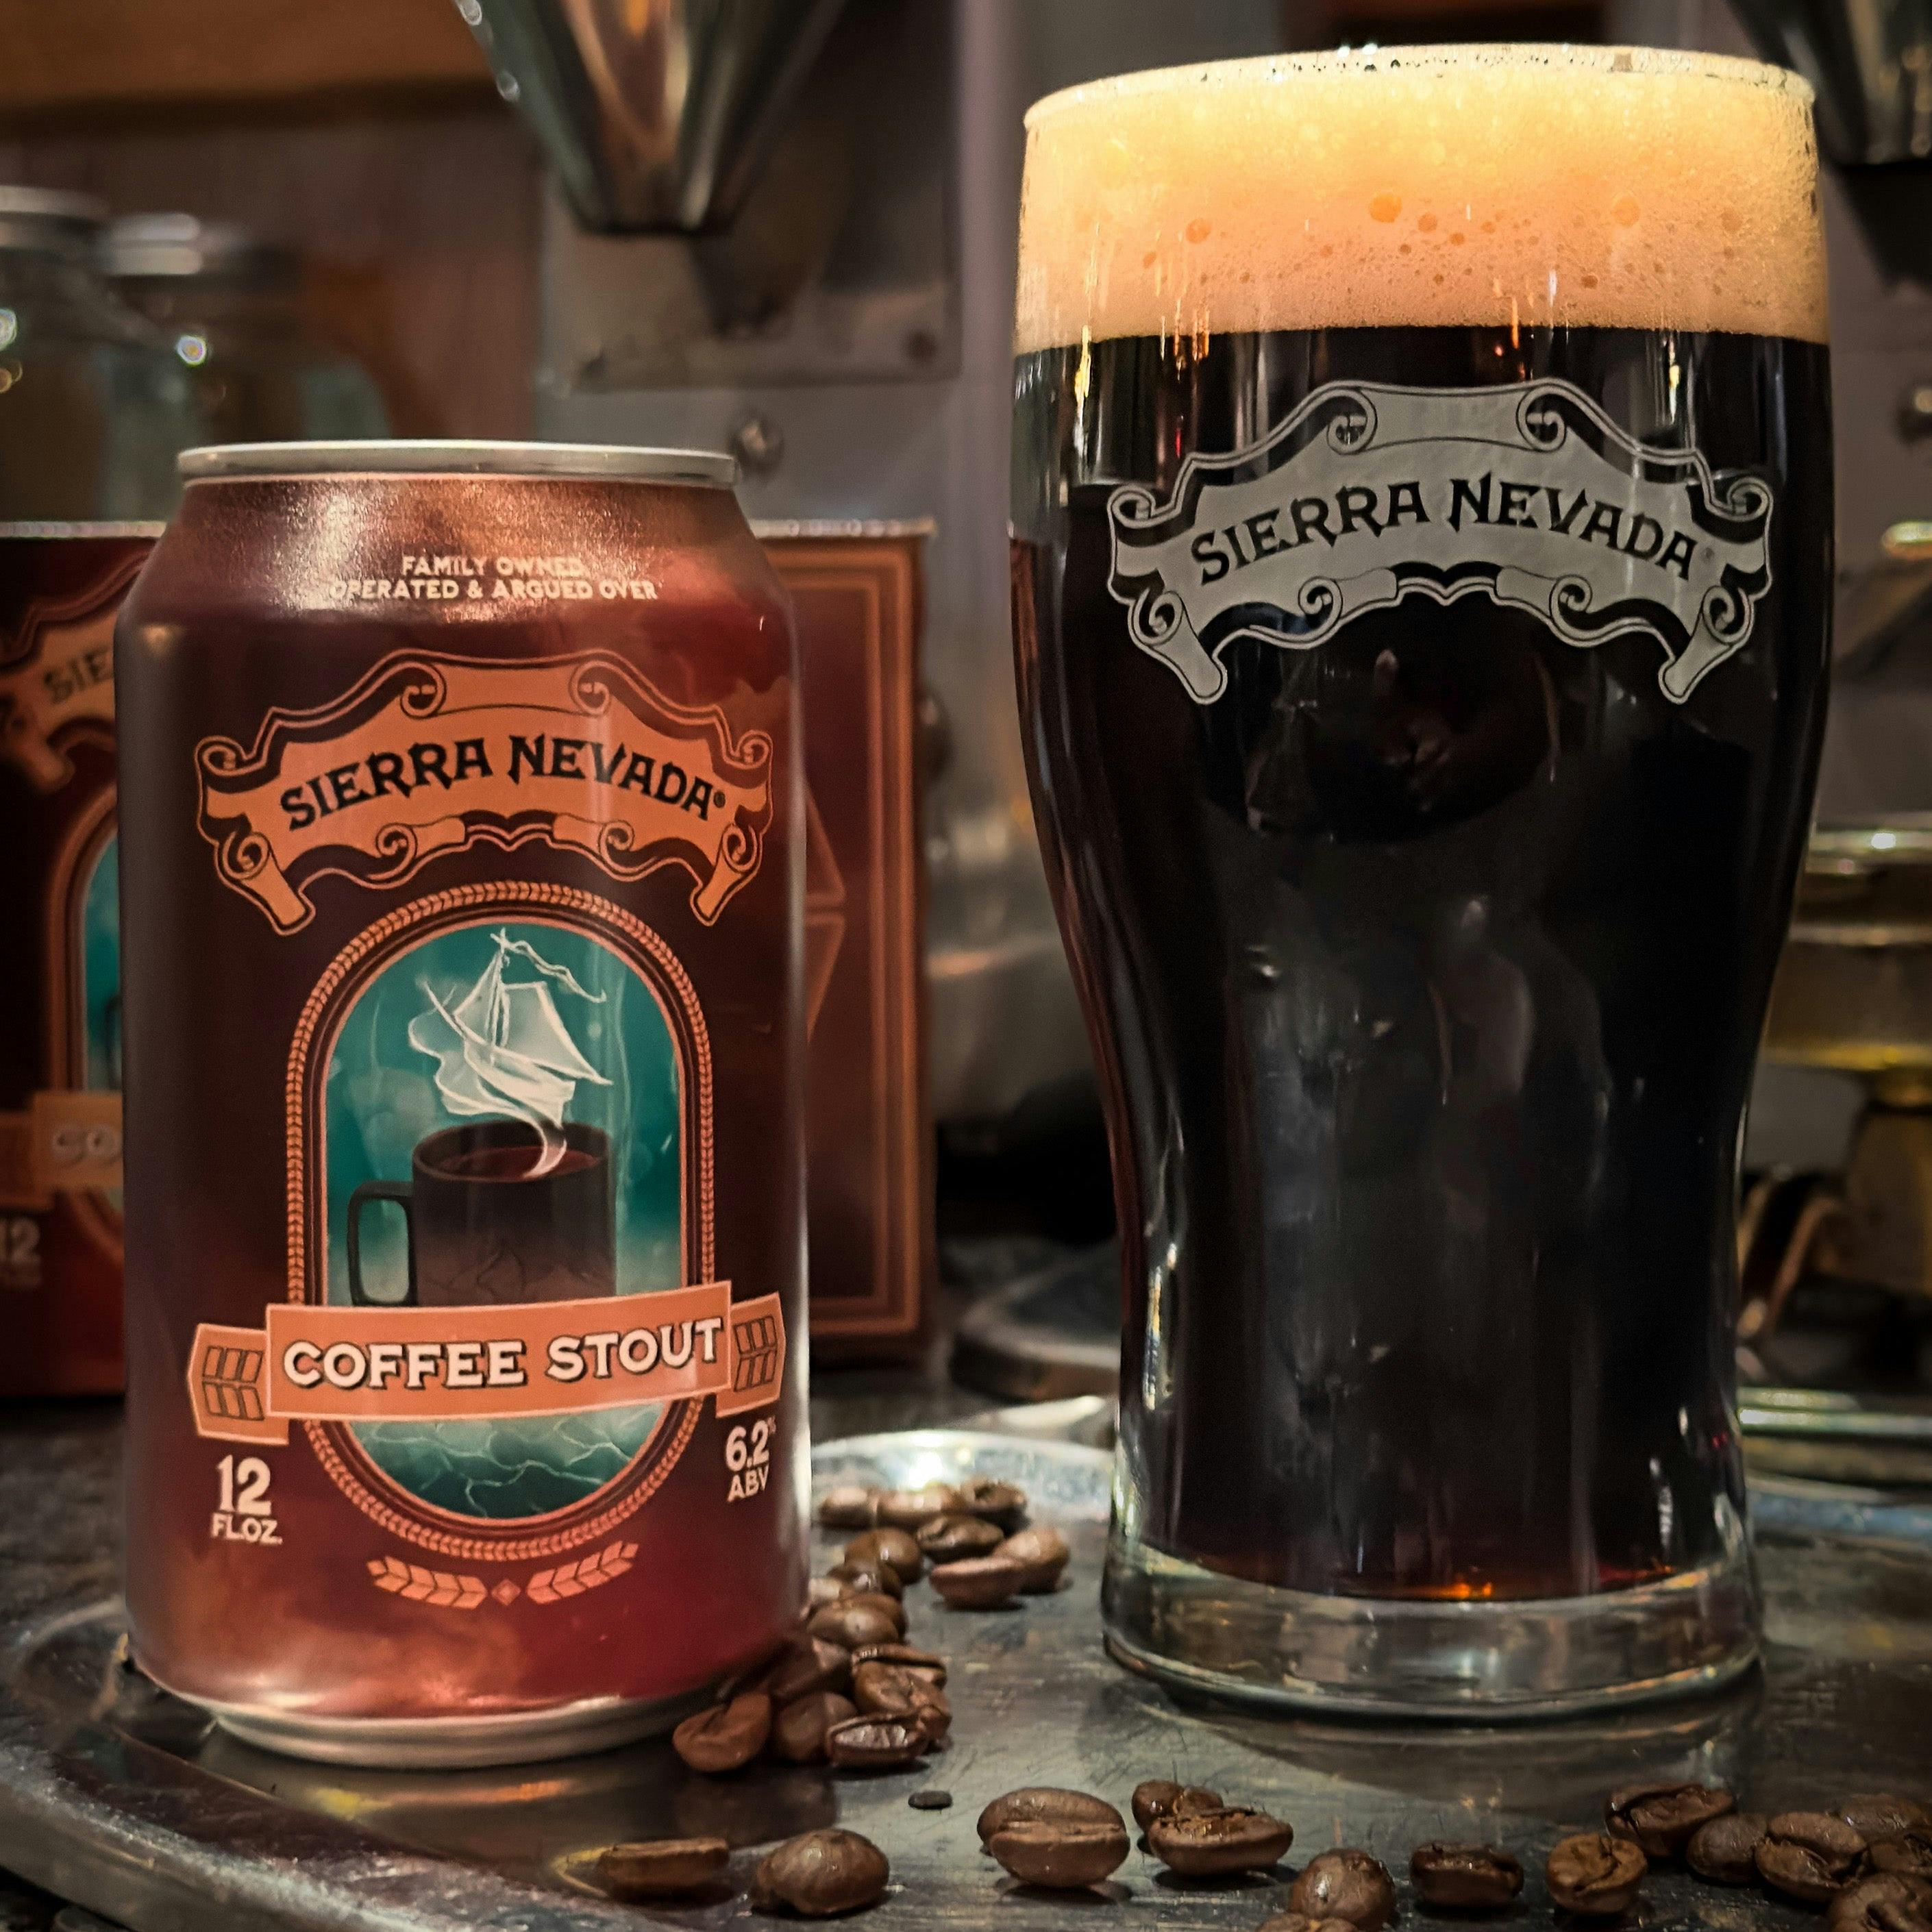 Sierra Nevada Brewing Co. Coffee Stout poured into a pint glass with a can sitting next to it at a bar